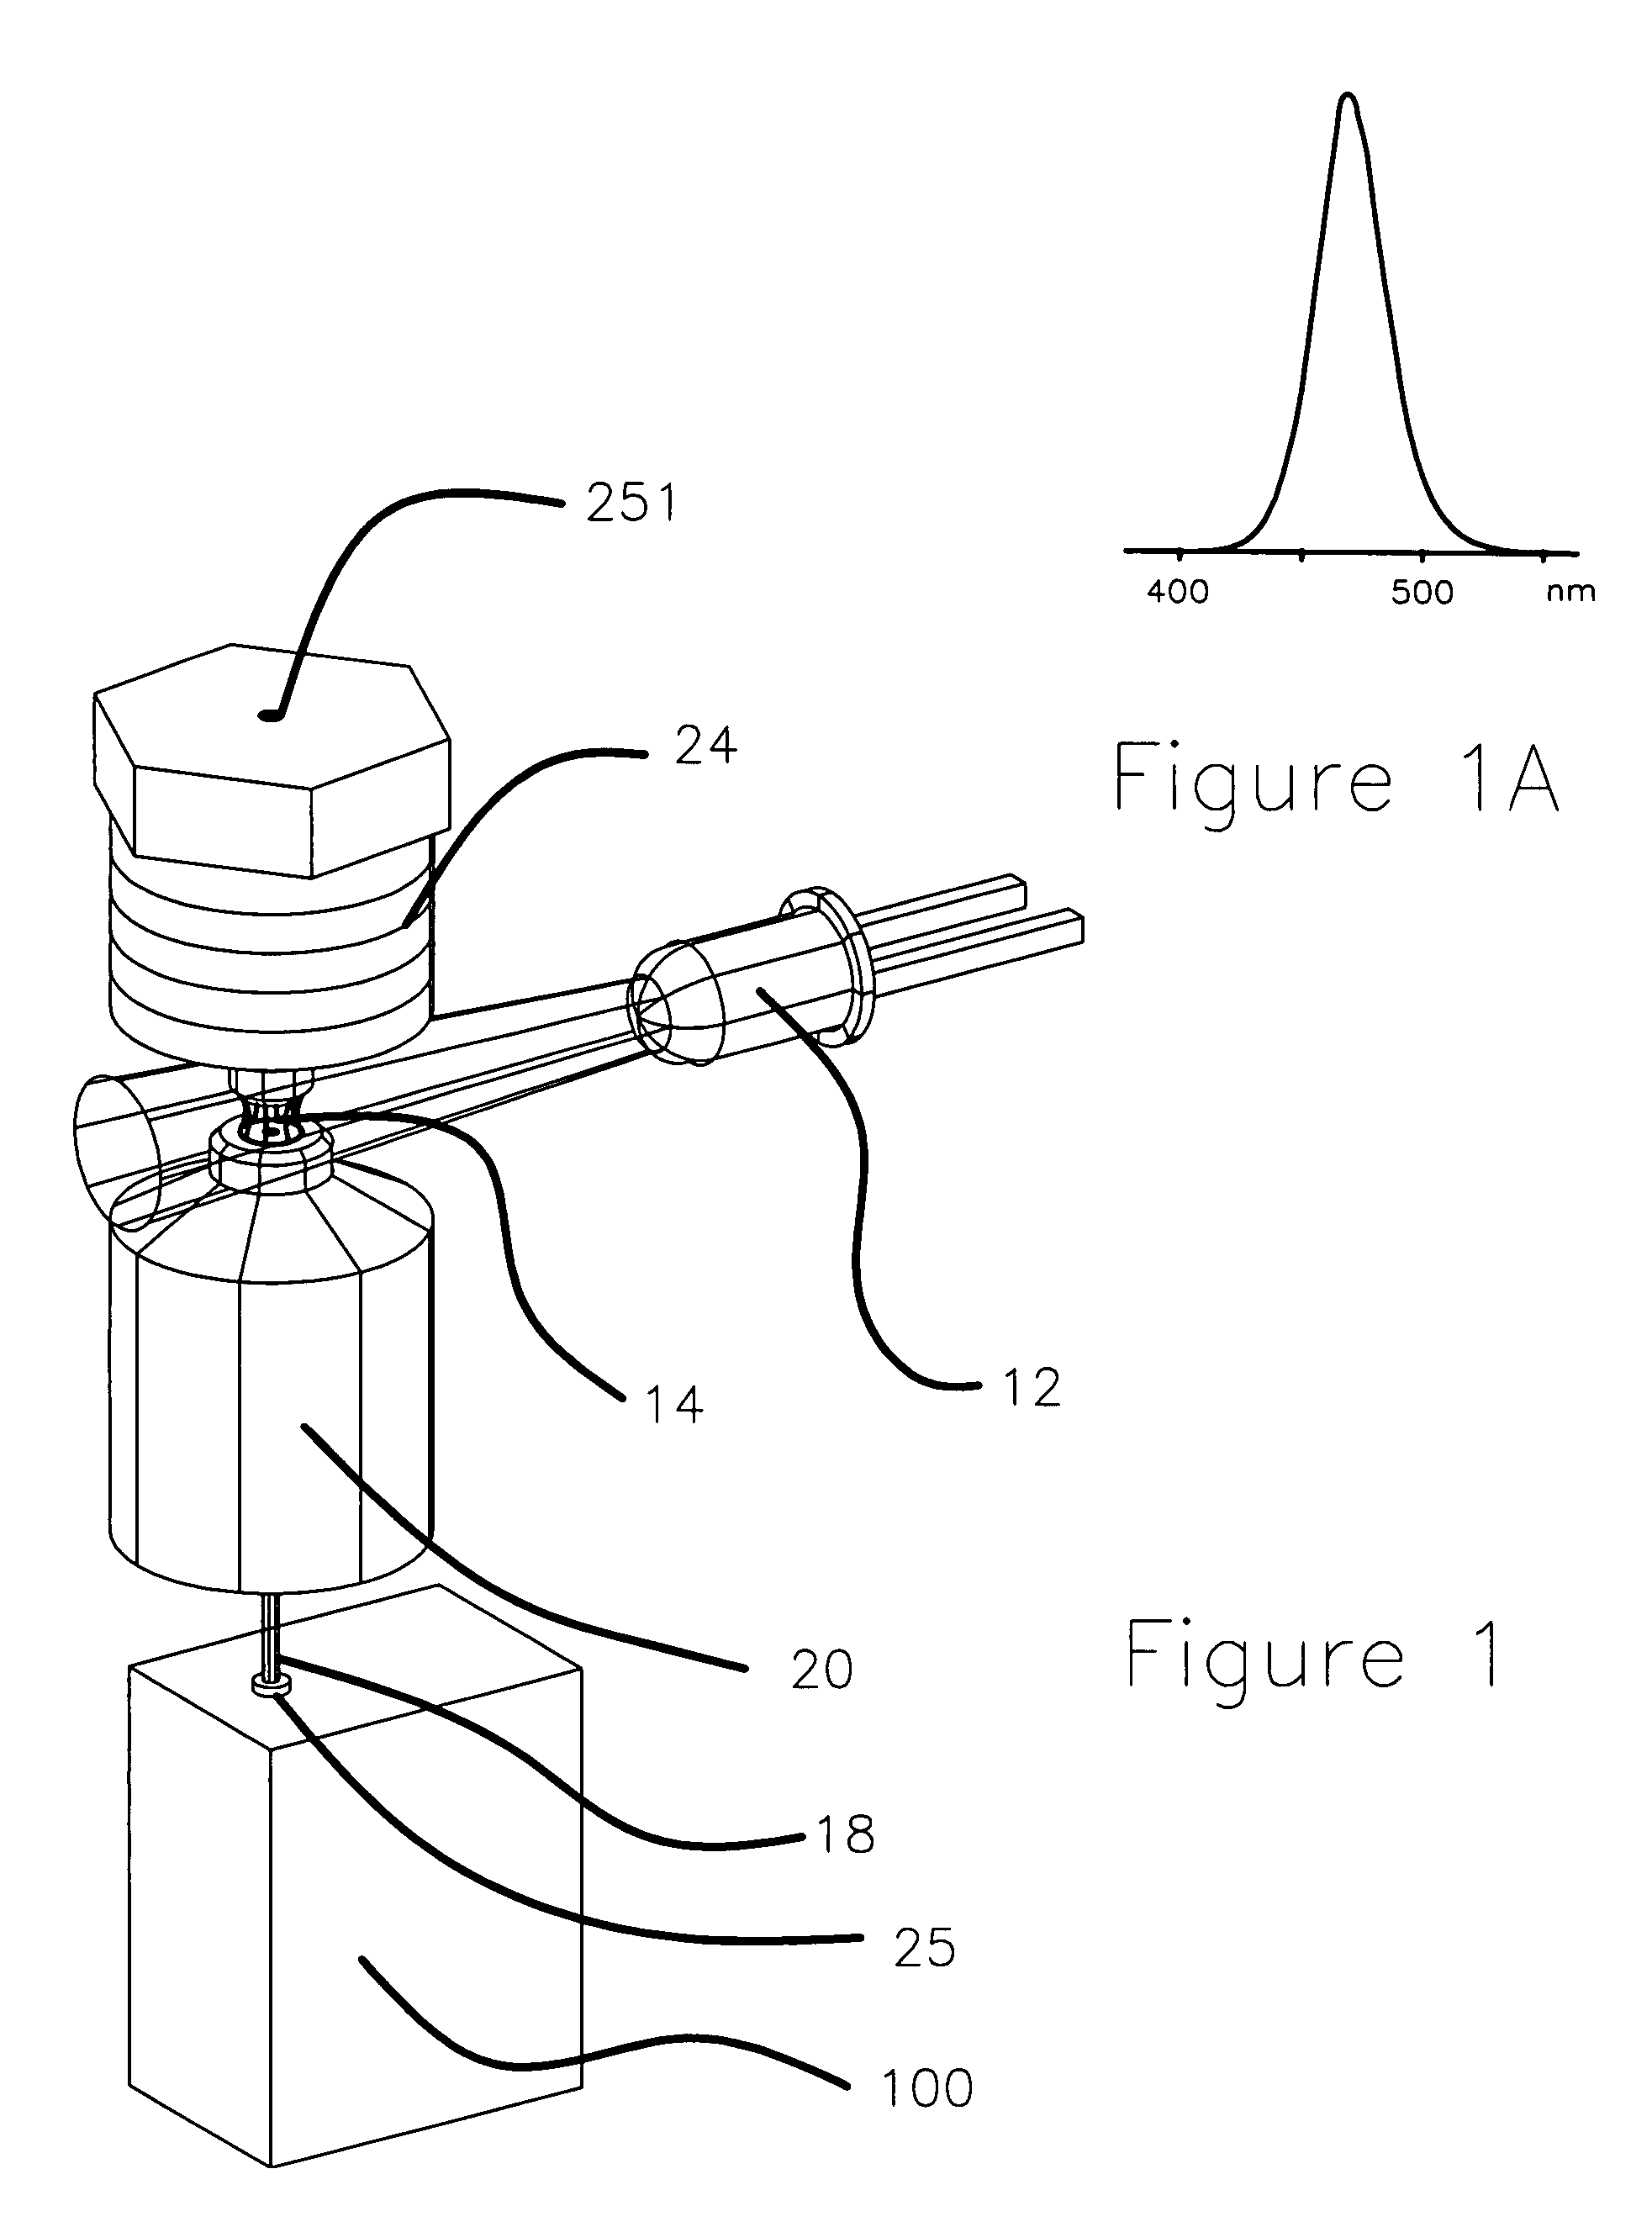 Apparatus and method for measuring the signal from a fluorescing nanodrop contained by surface tension